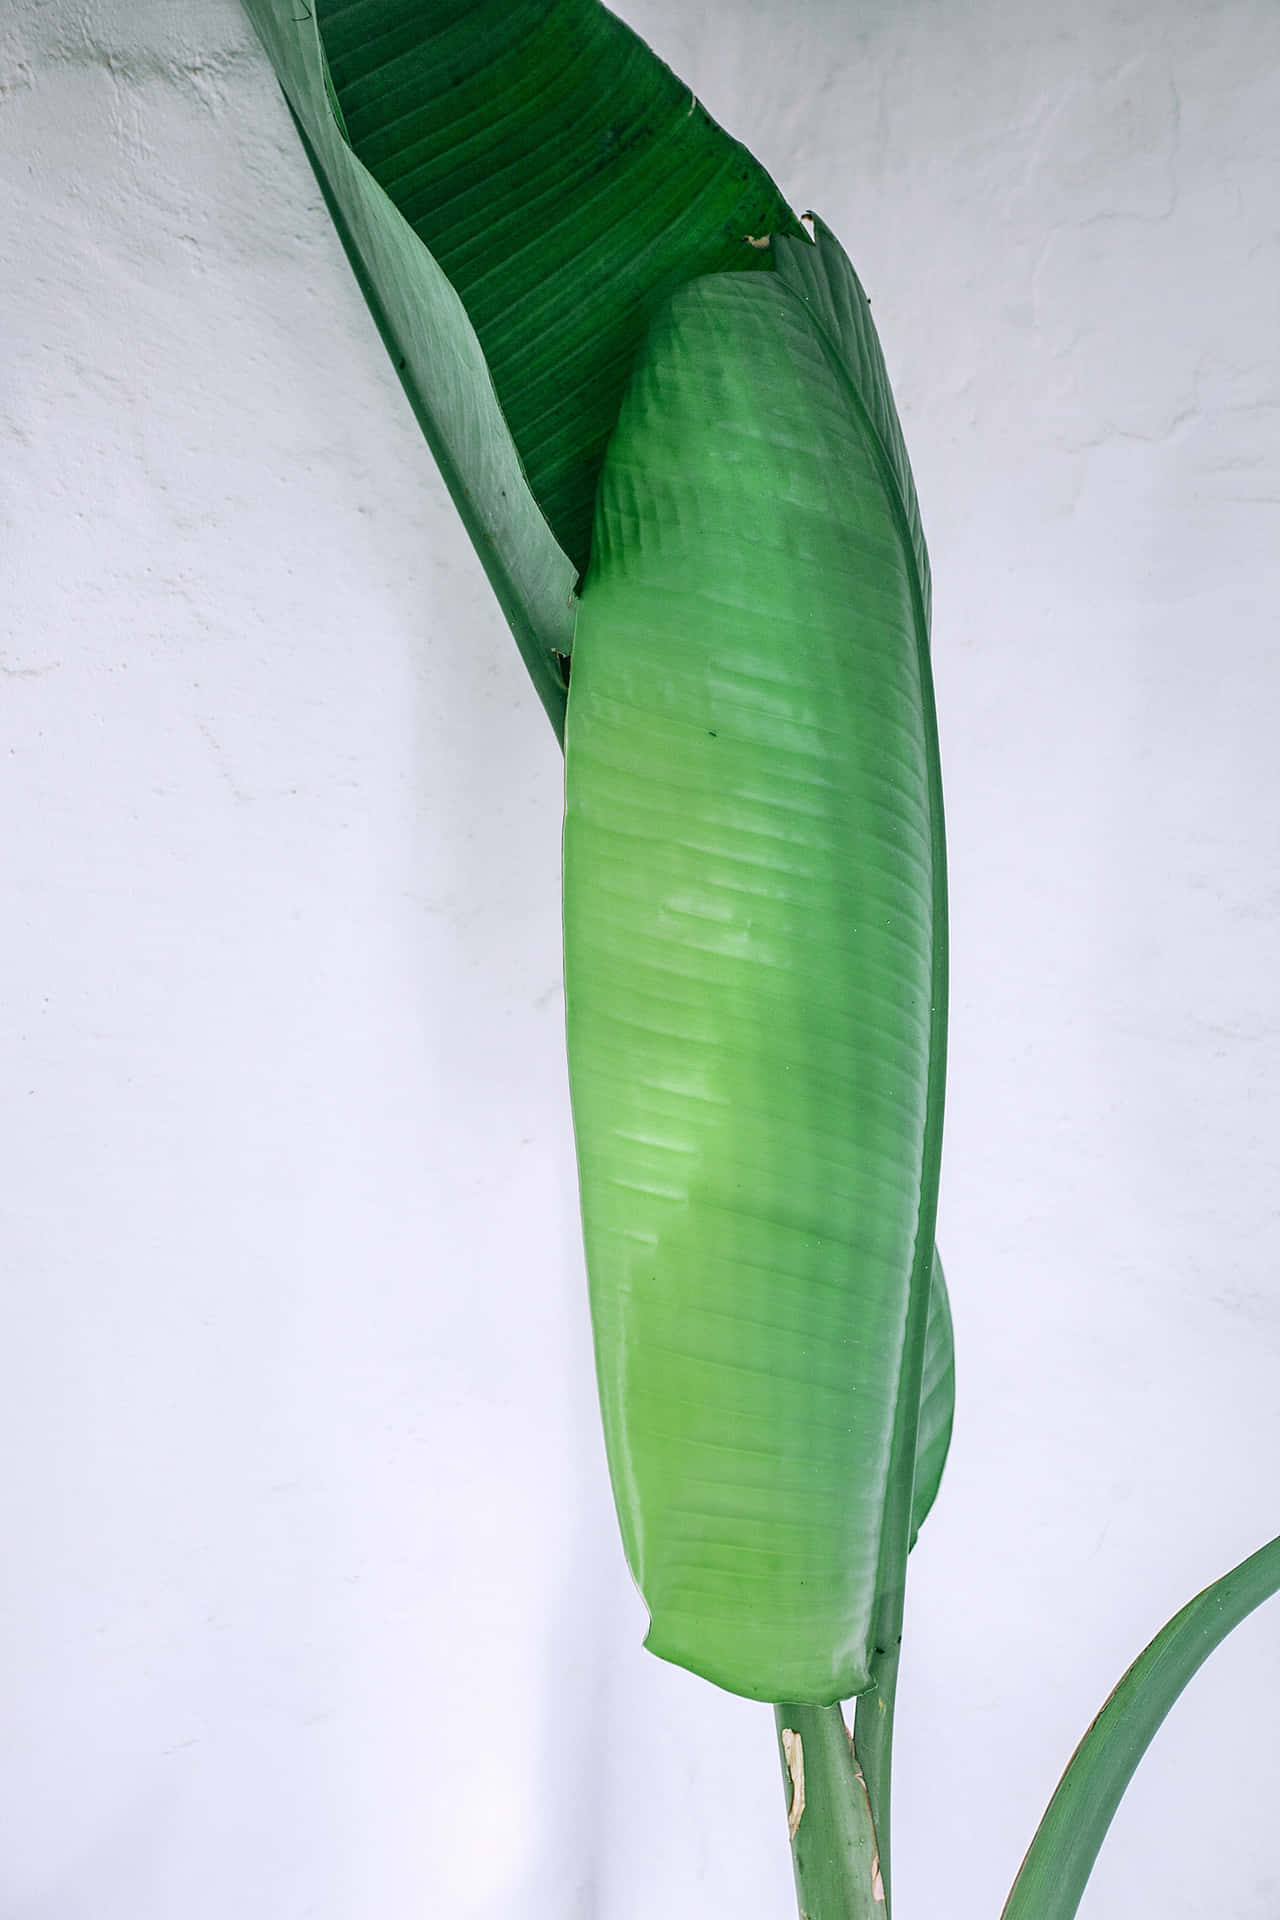 A bright and vibrant photo of a banana leaf.